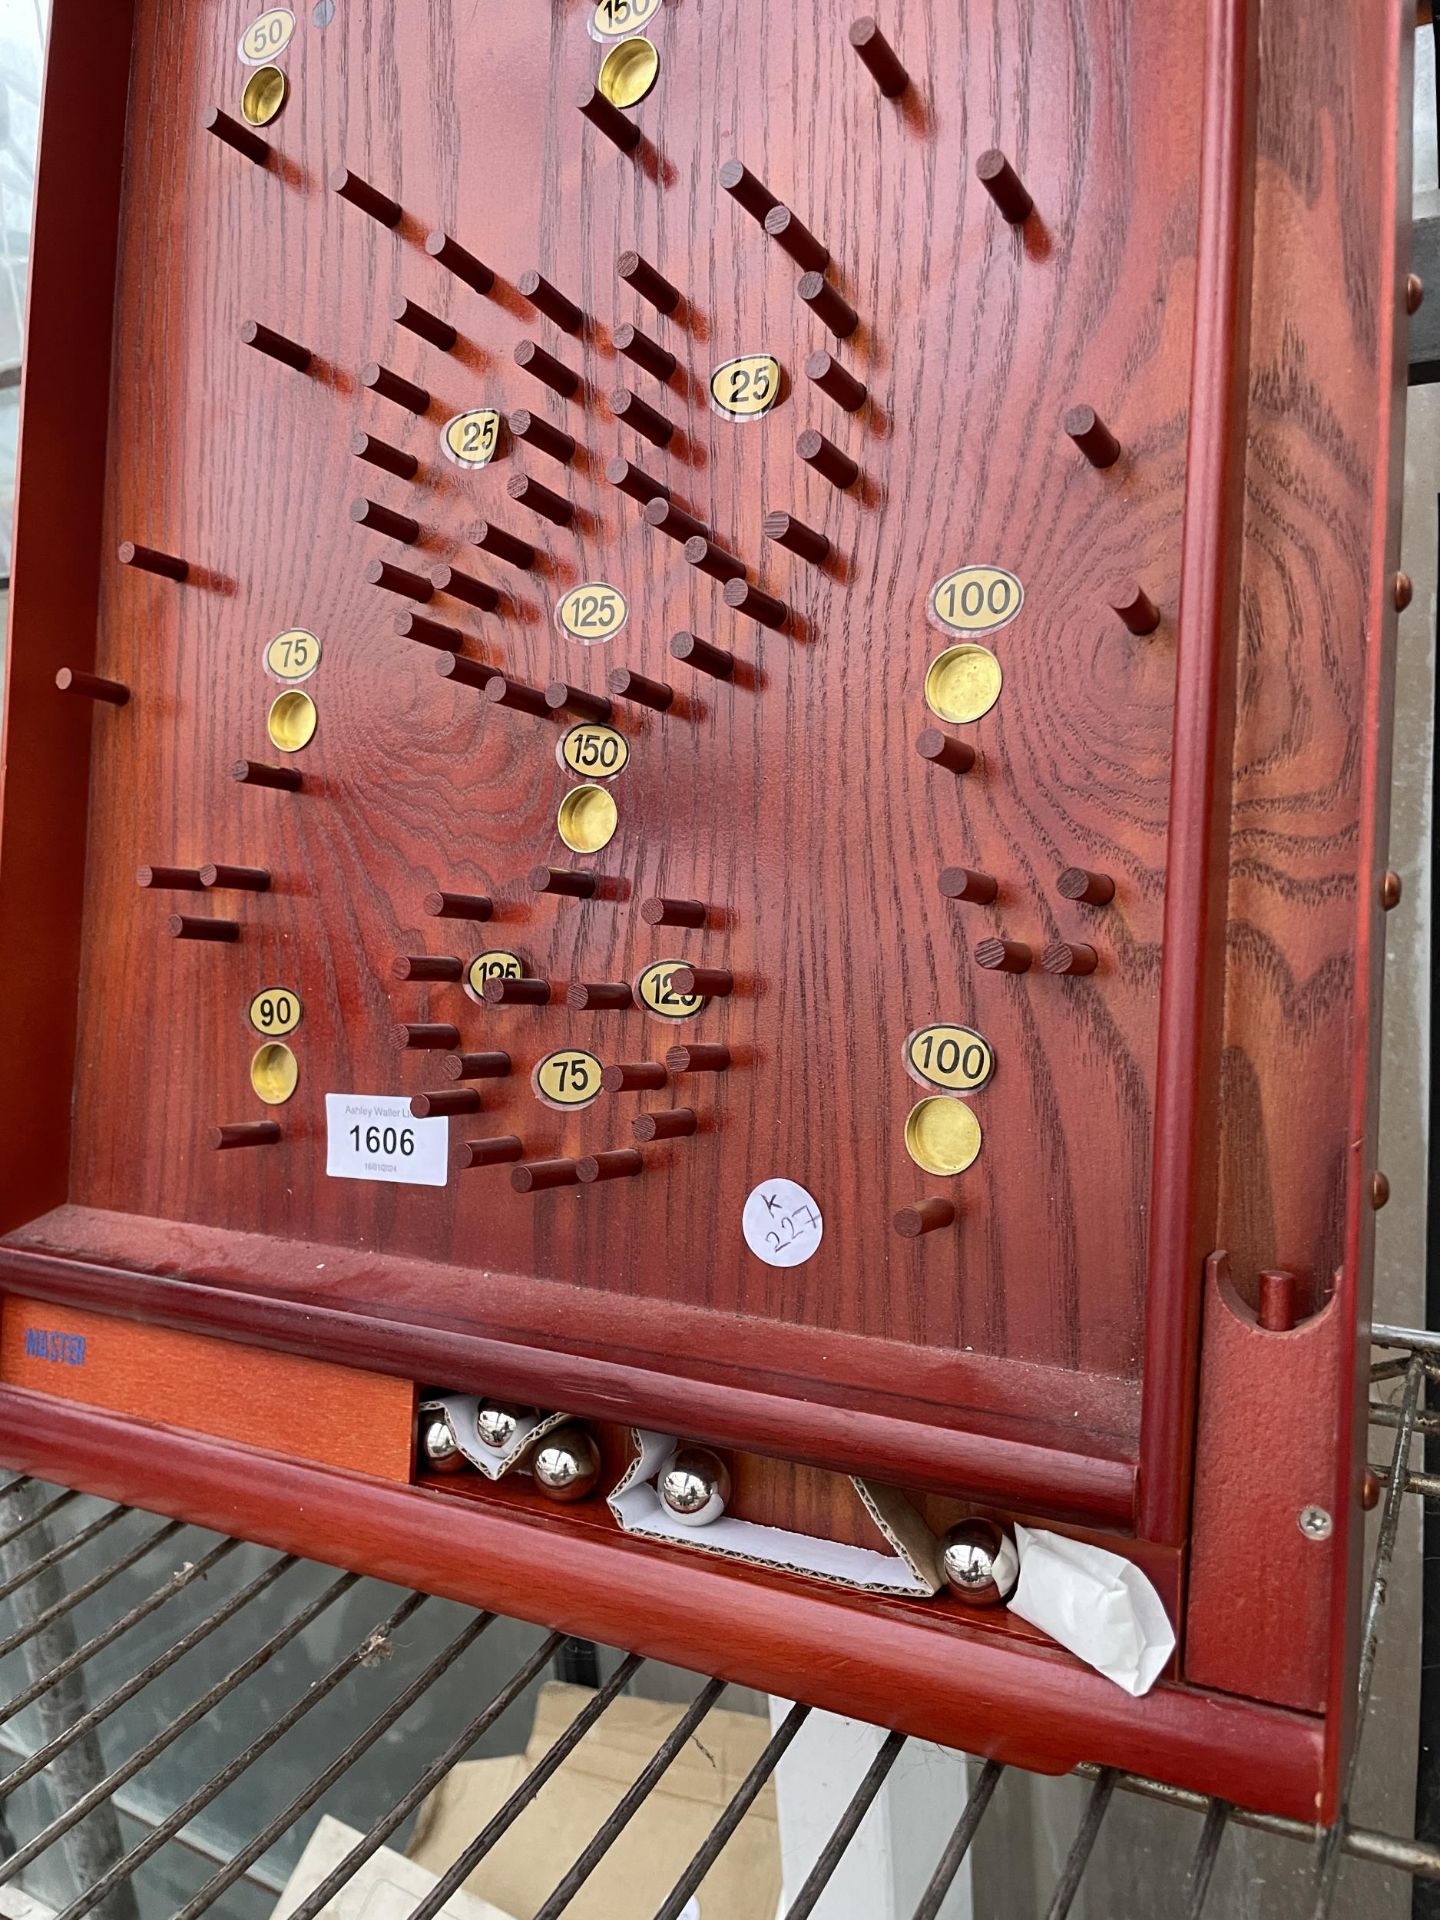 A VINTAGE WOODEN BAGATELLE GAME COMPLETE WITH BALLS - Image 2 of 2